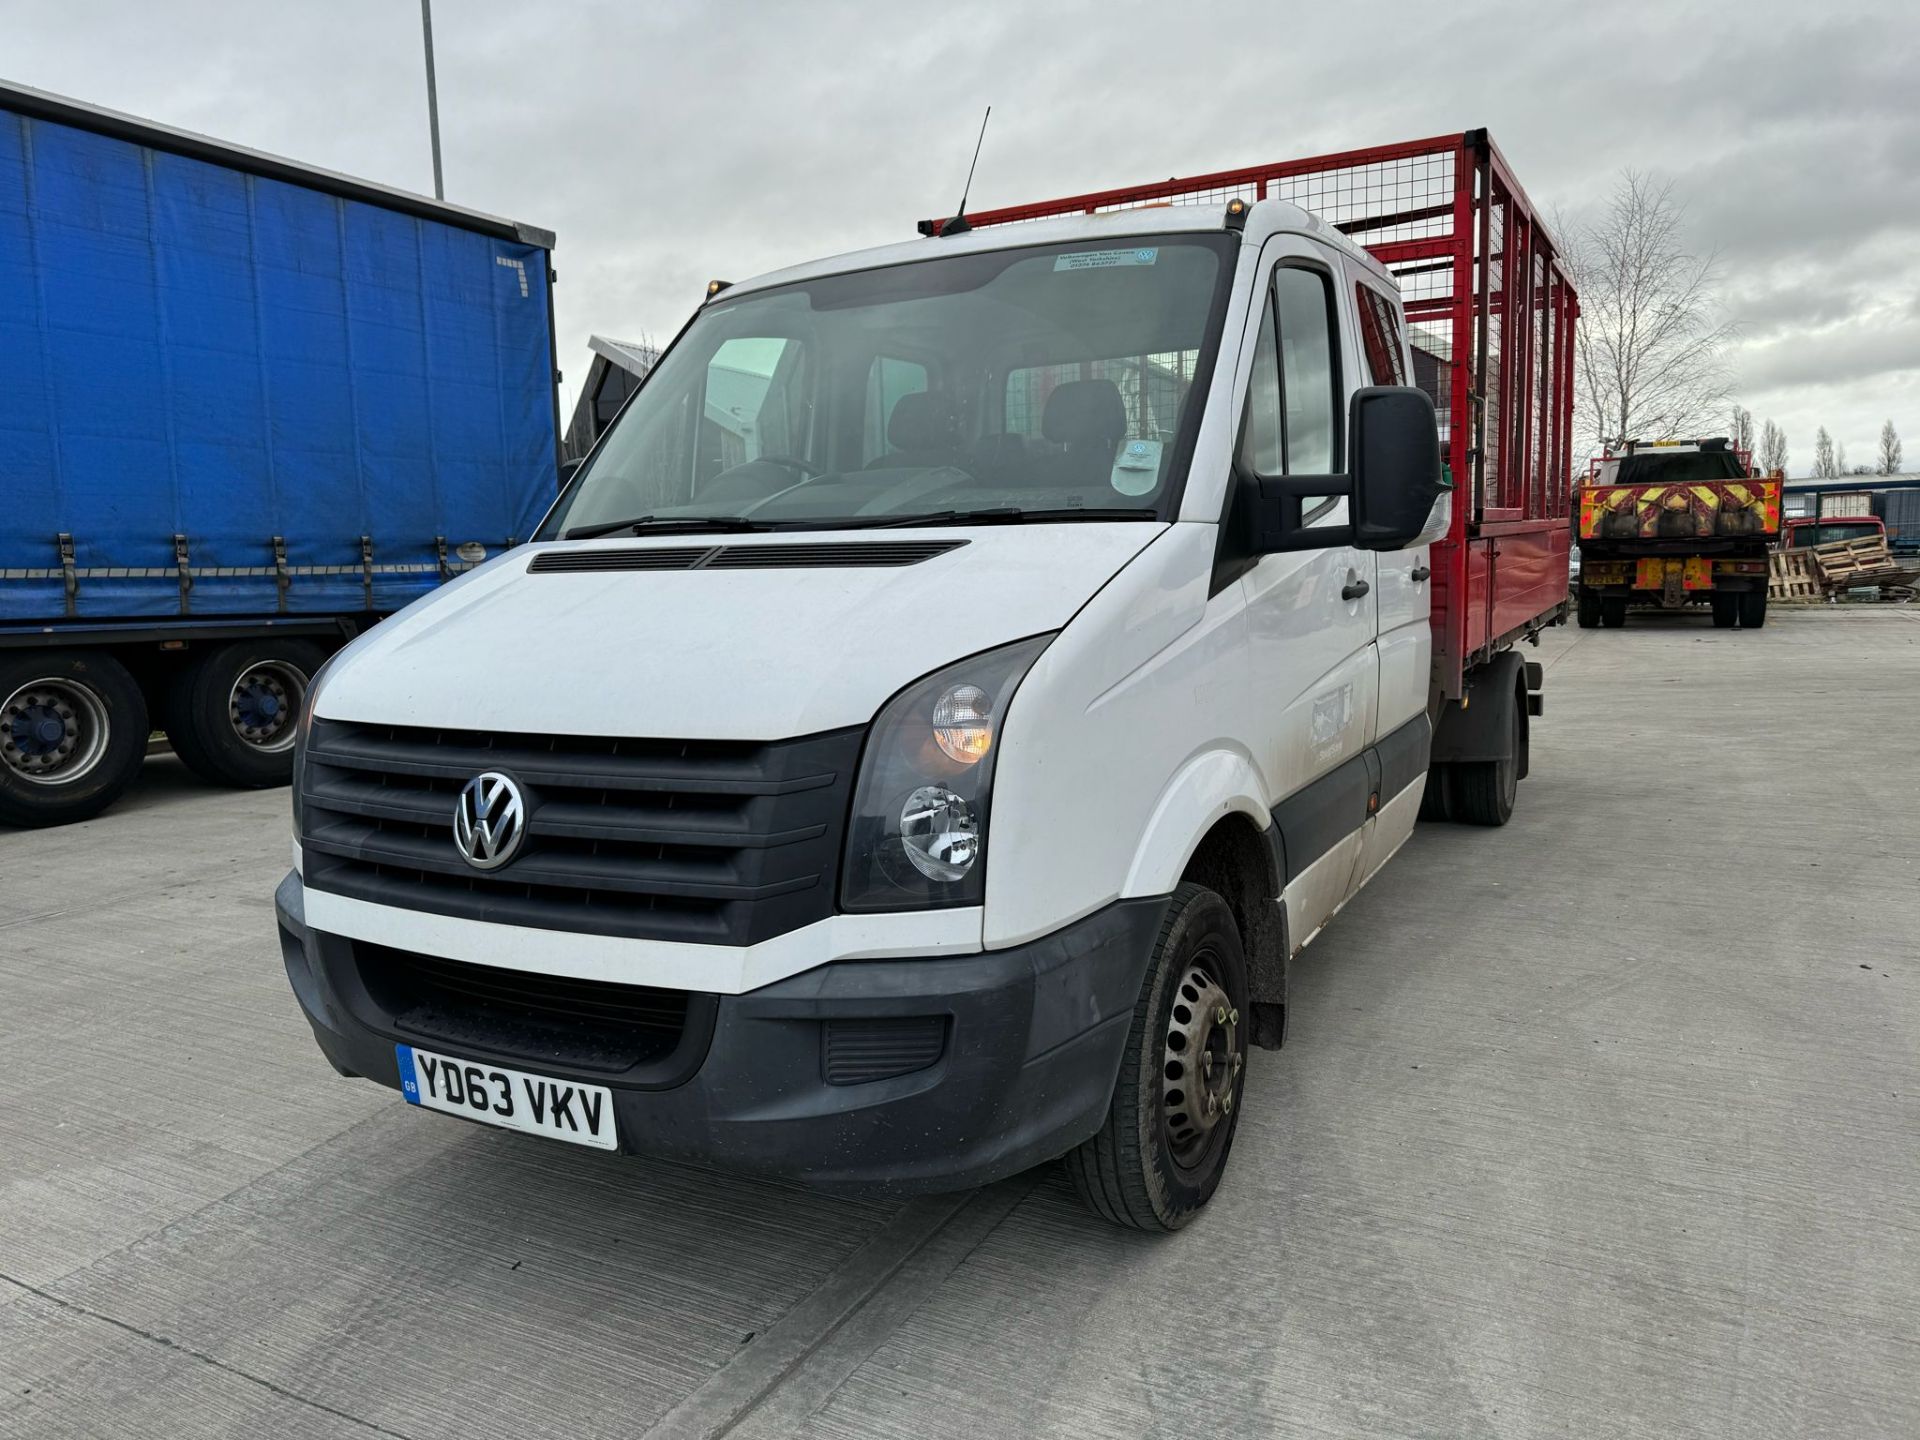 2013, VOLKSWAGEN Crafter CR50 Startline TDI, HGV Caged Tipper Van (Ex-Council Owned & Maintained) - Image 3 of 42